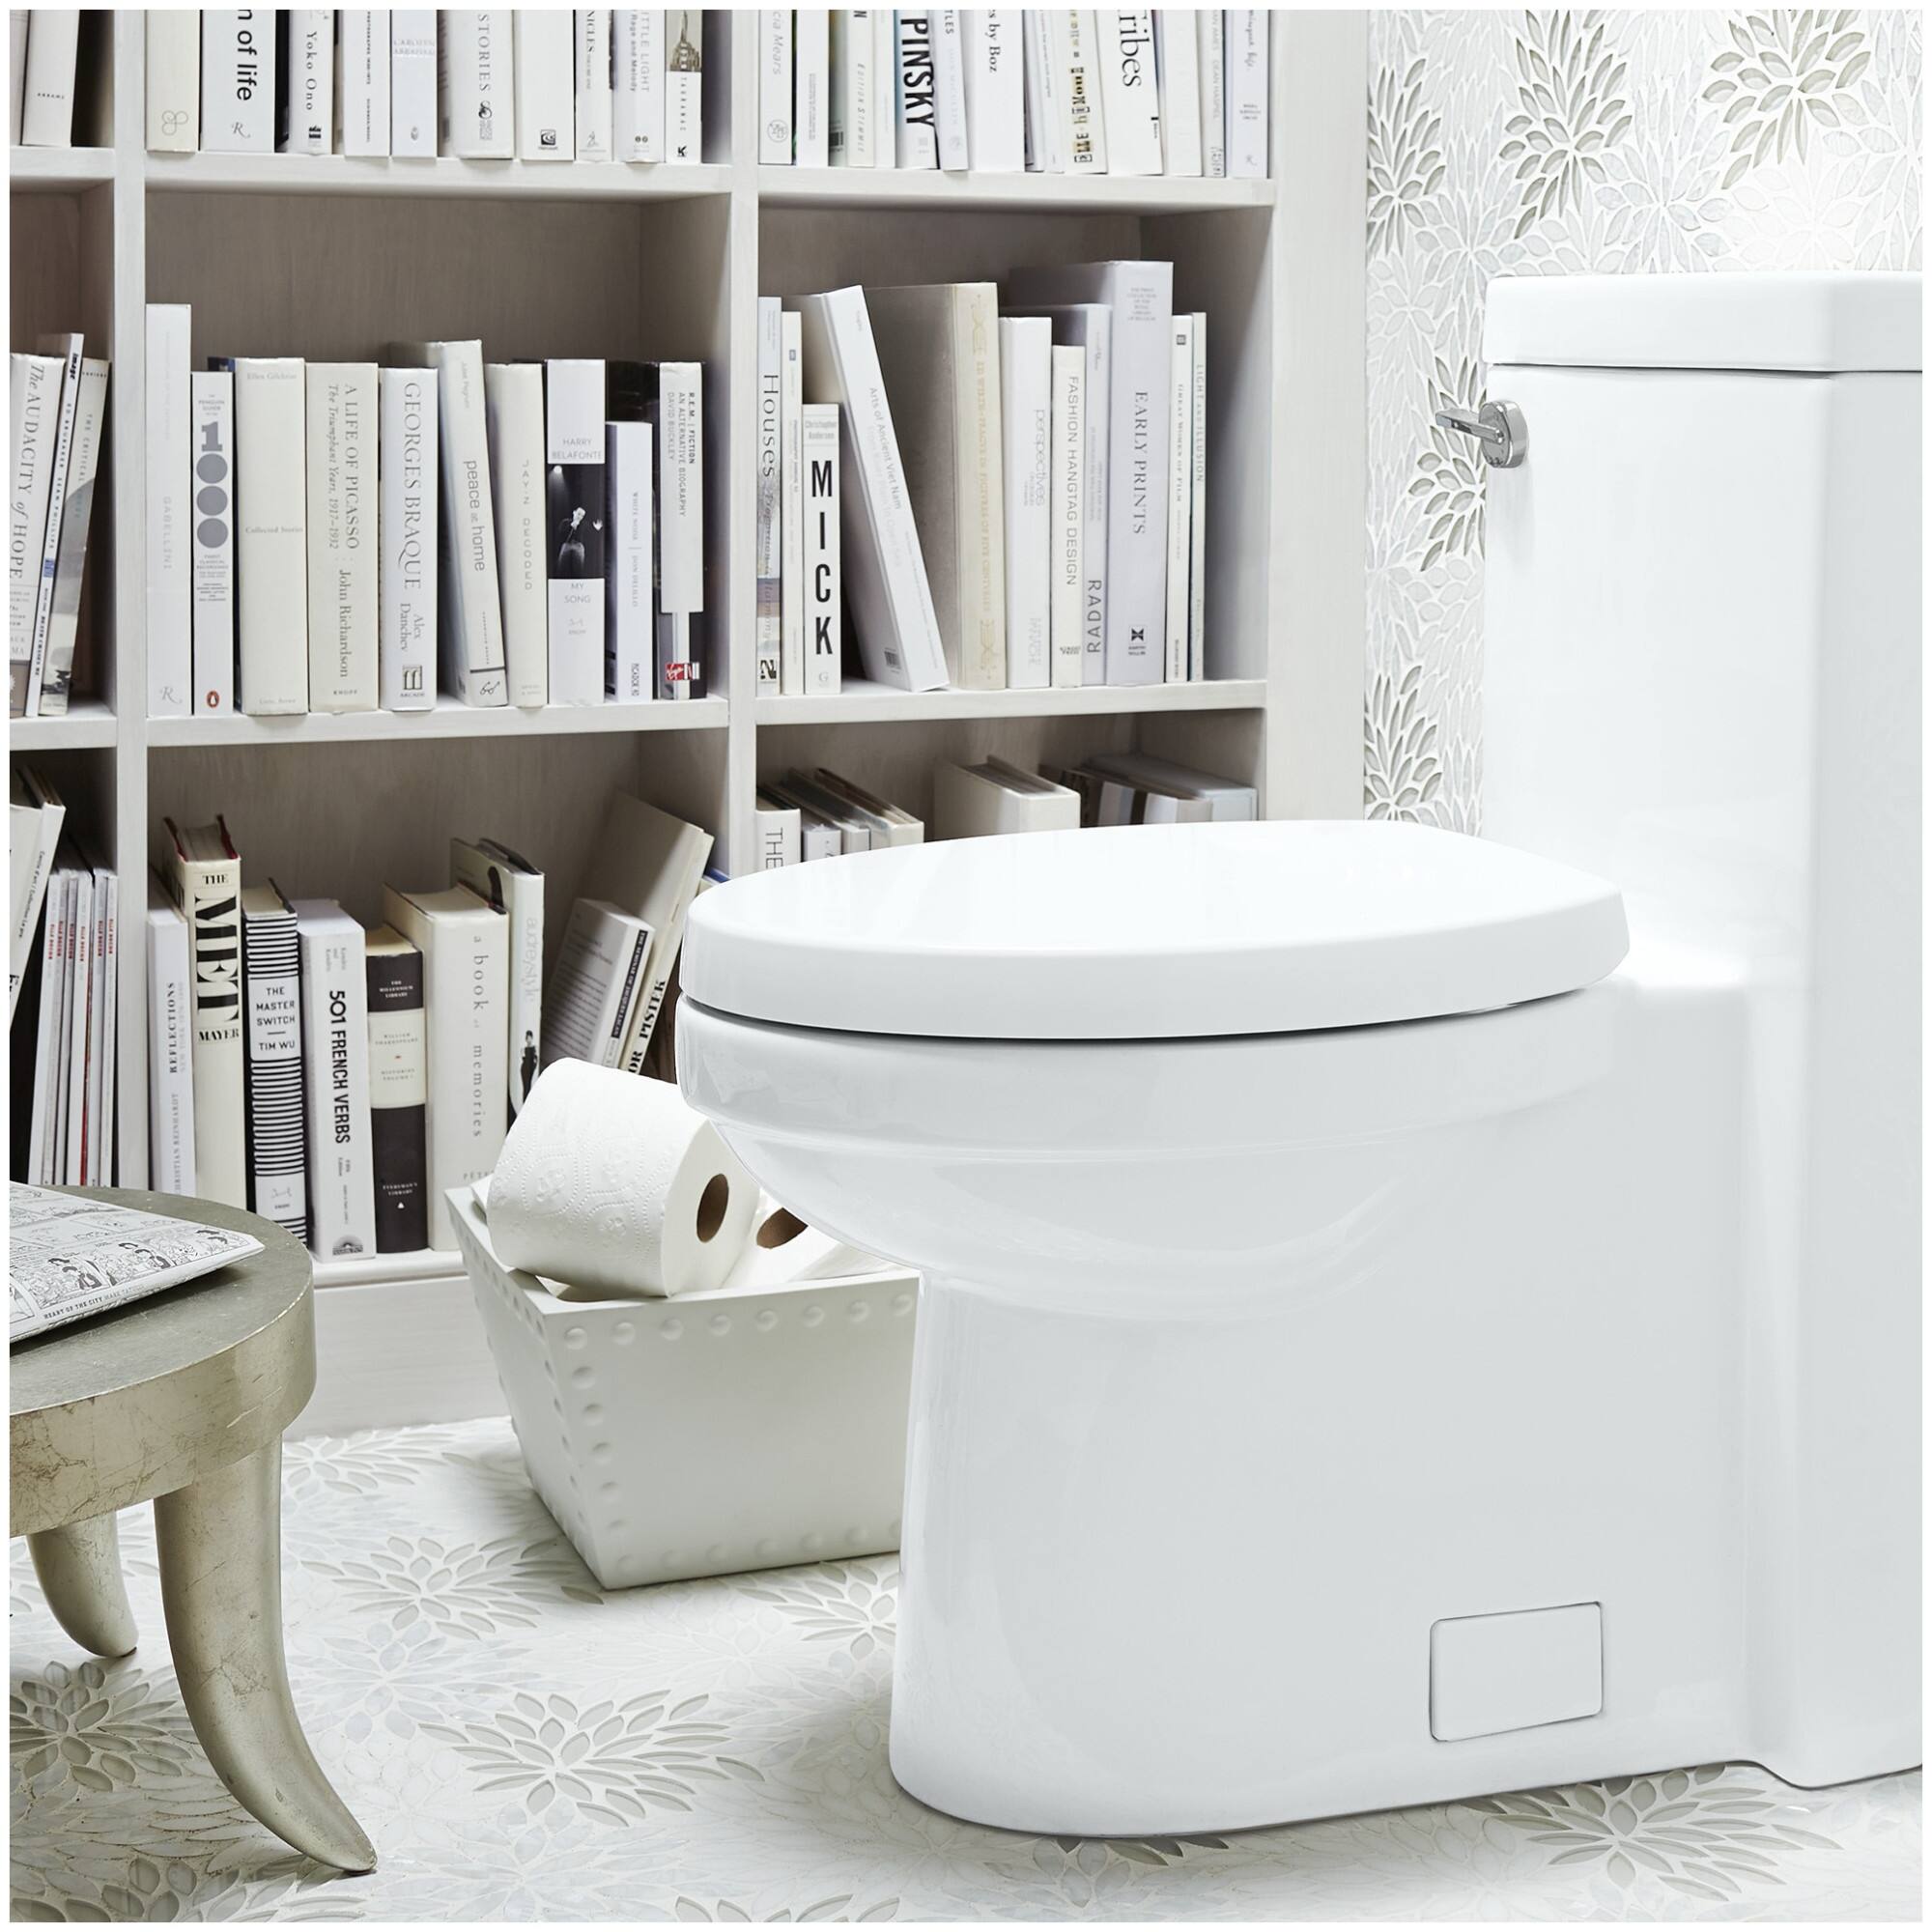 DXV Cossu 1.28 GPF One Piece Elongated Chair Height Toilet with Left - Canvas White